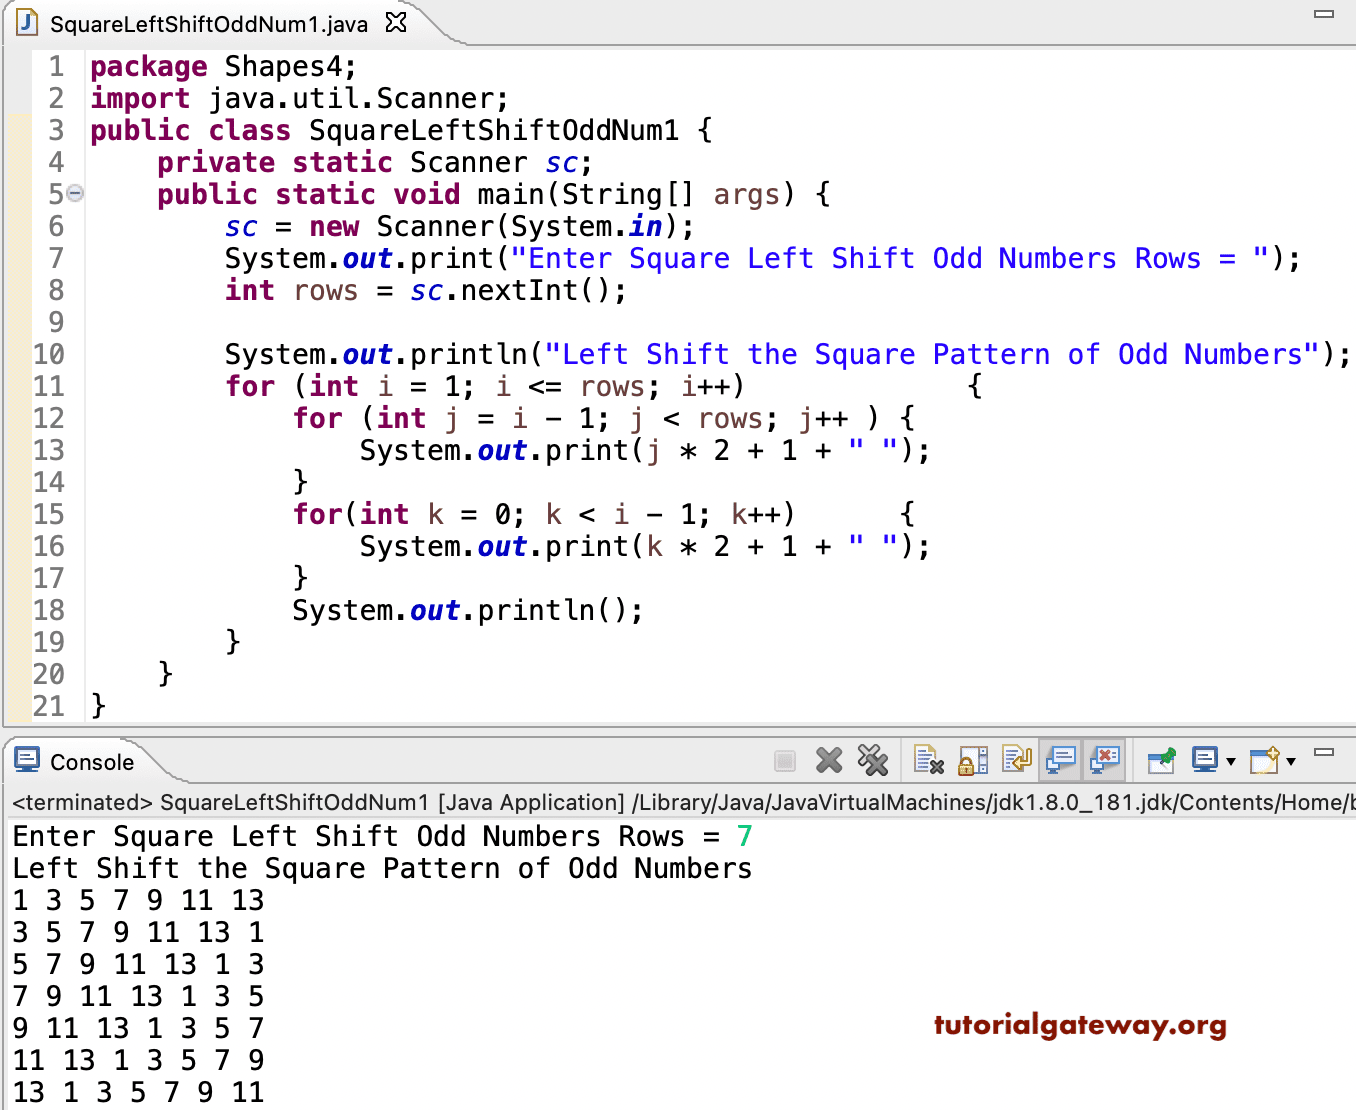 Java Program to Left Shift the Square Pattern of Odd Numbers